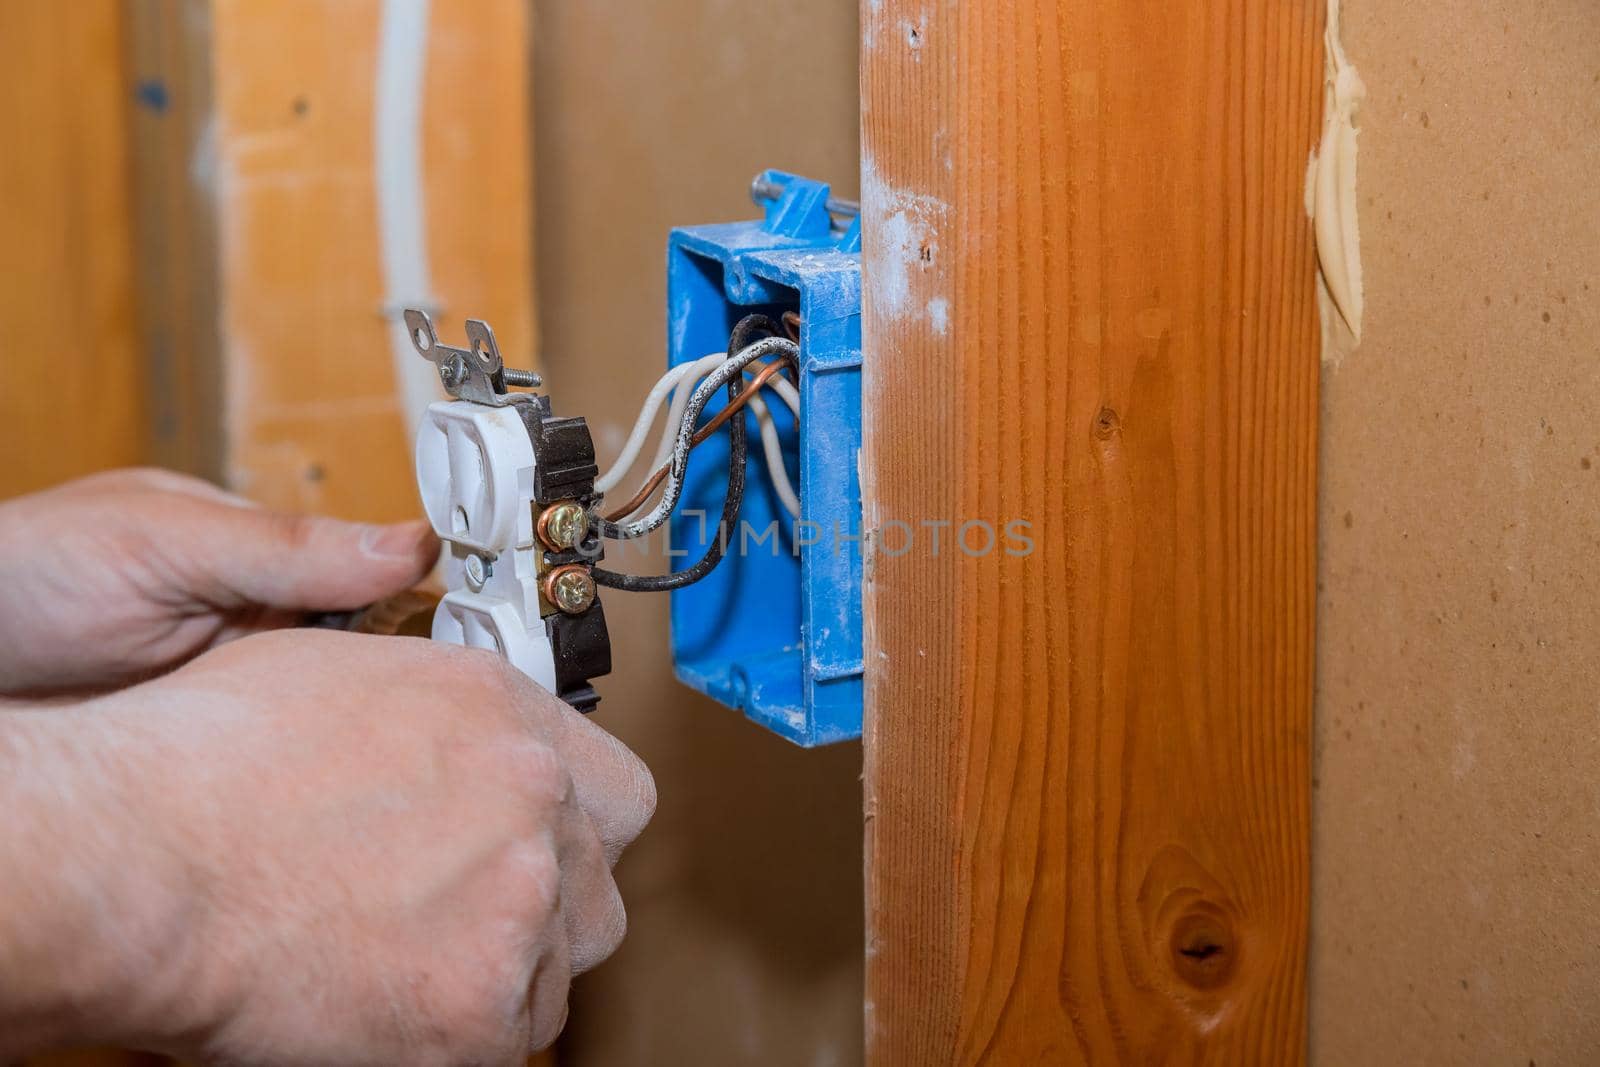 Preparing to remove an electrical outlet of the screws for electrical wires by ungvar